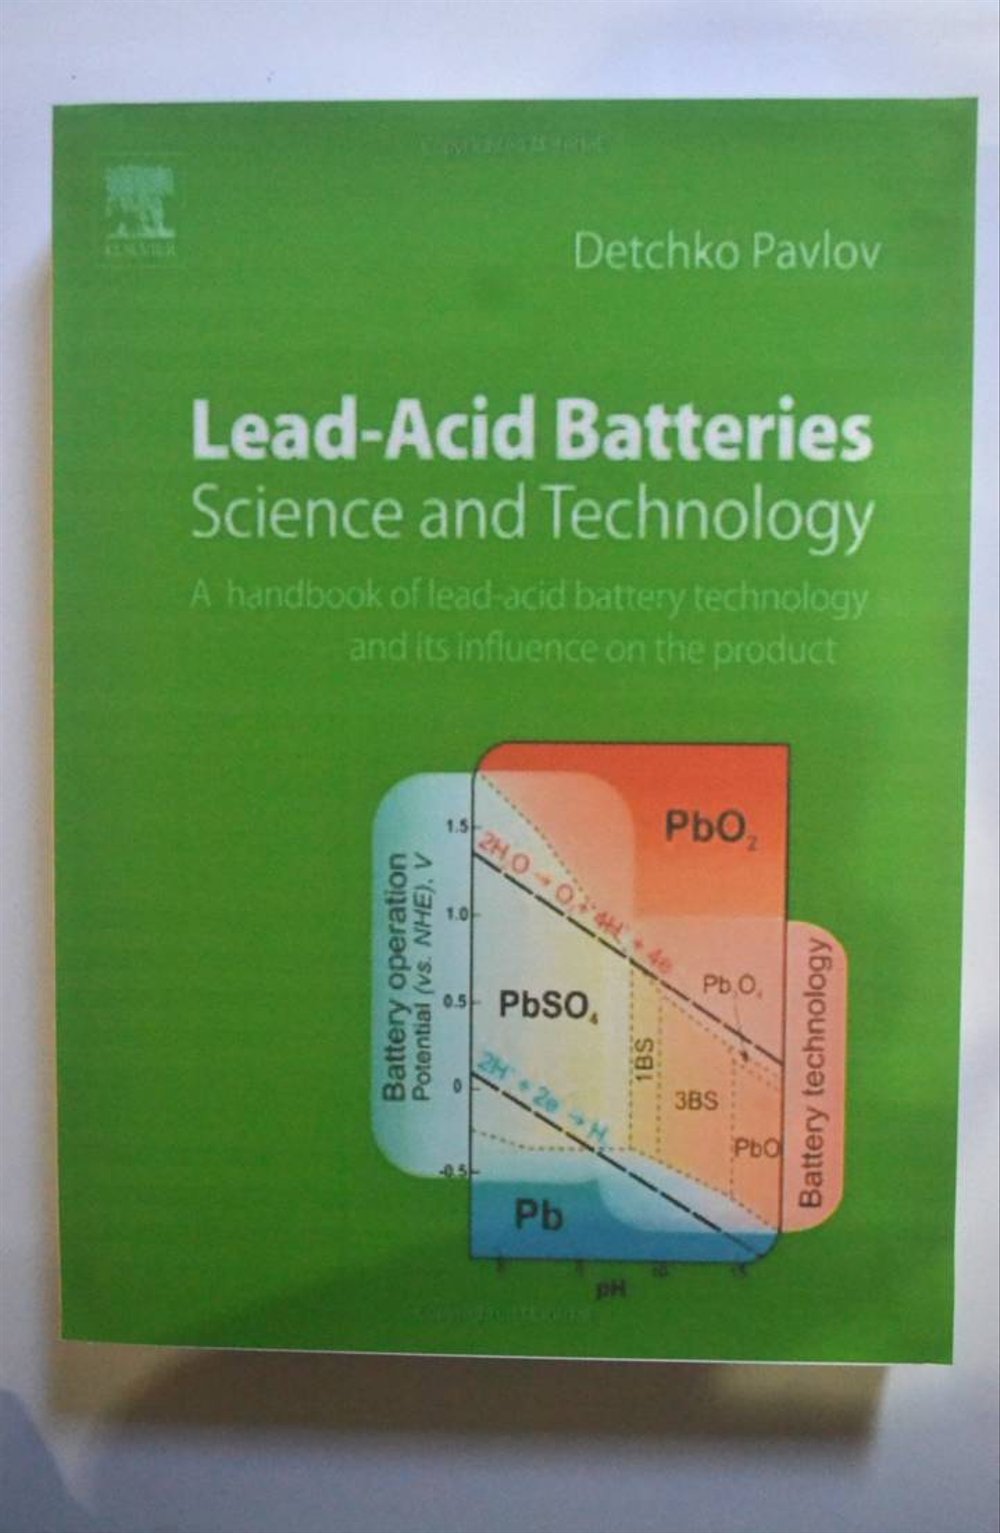 A Handbook of Lead-Acid Battery Technology and its Influence on the Product